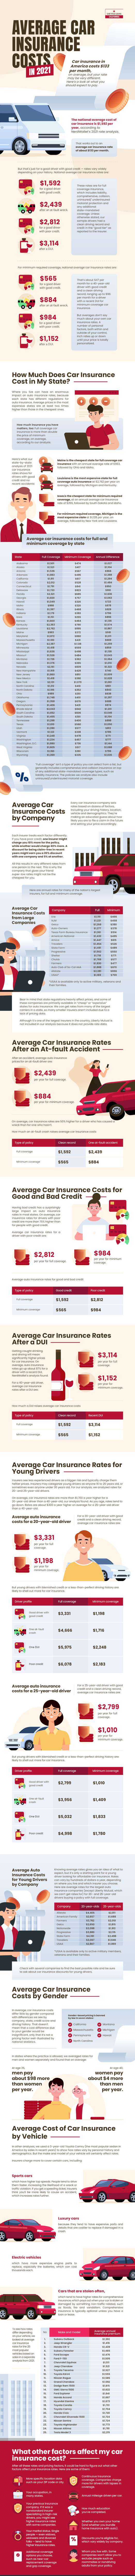 Full Coverage of Car Insurance in America – How to Find Insurance?